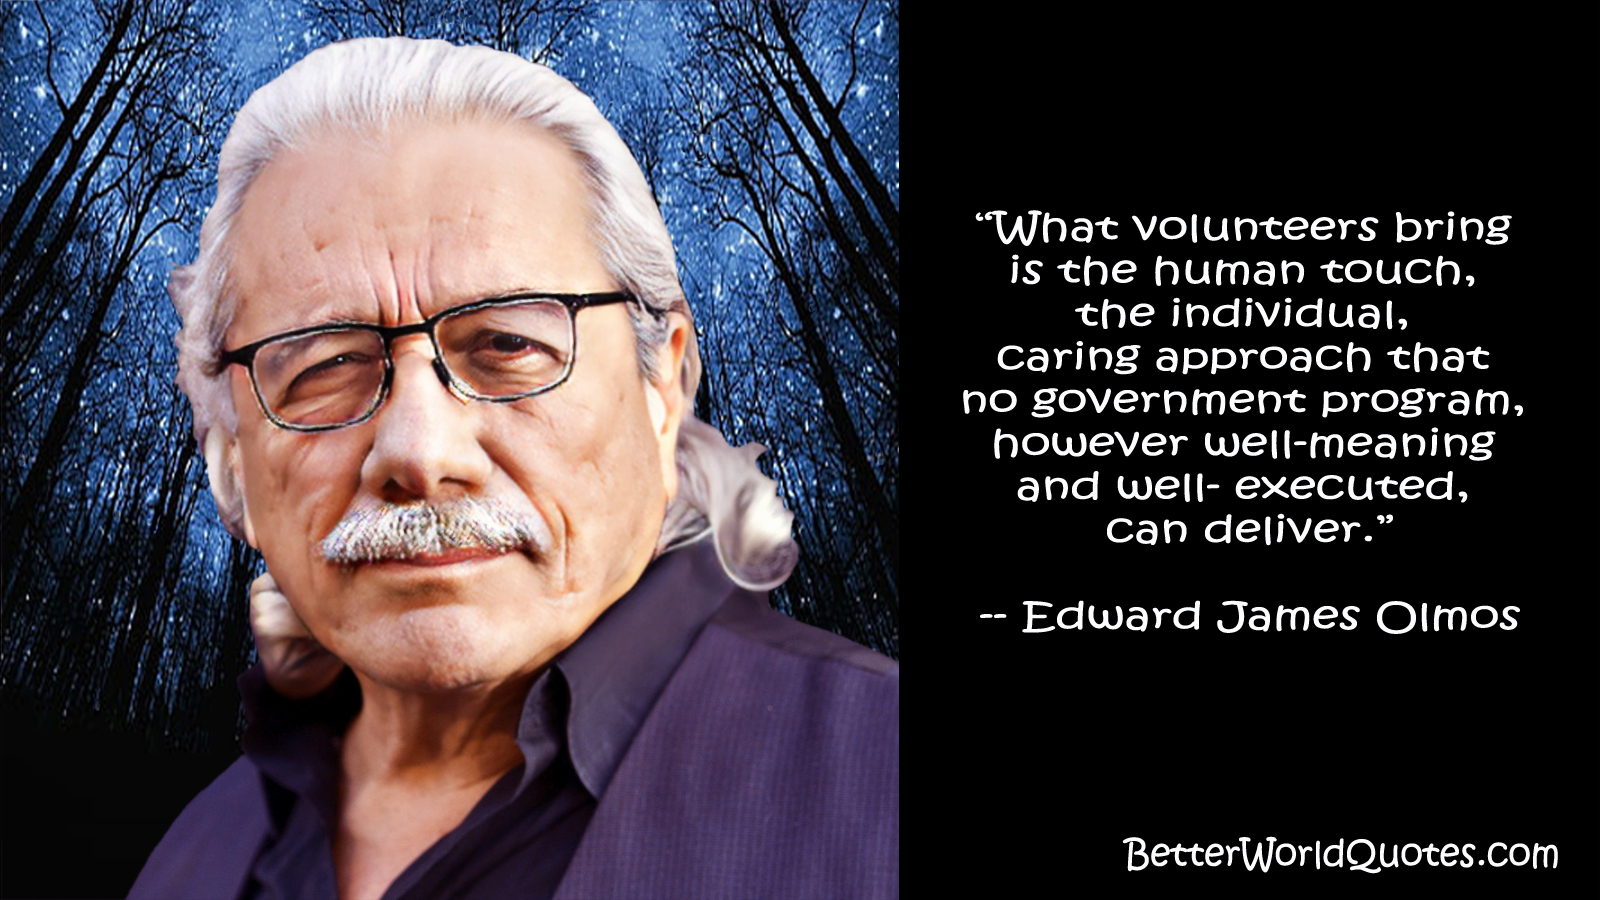 Edward James Olmos: What volunteers bring is the human touch, the individual, caring approach that no government program, however well-meaning and well- executed, can deliver.